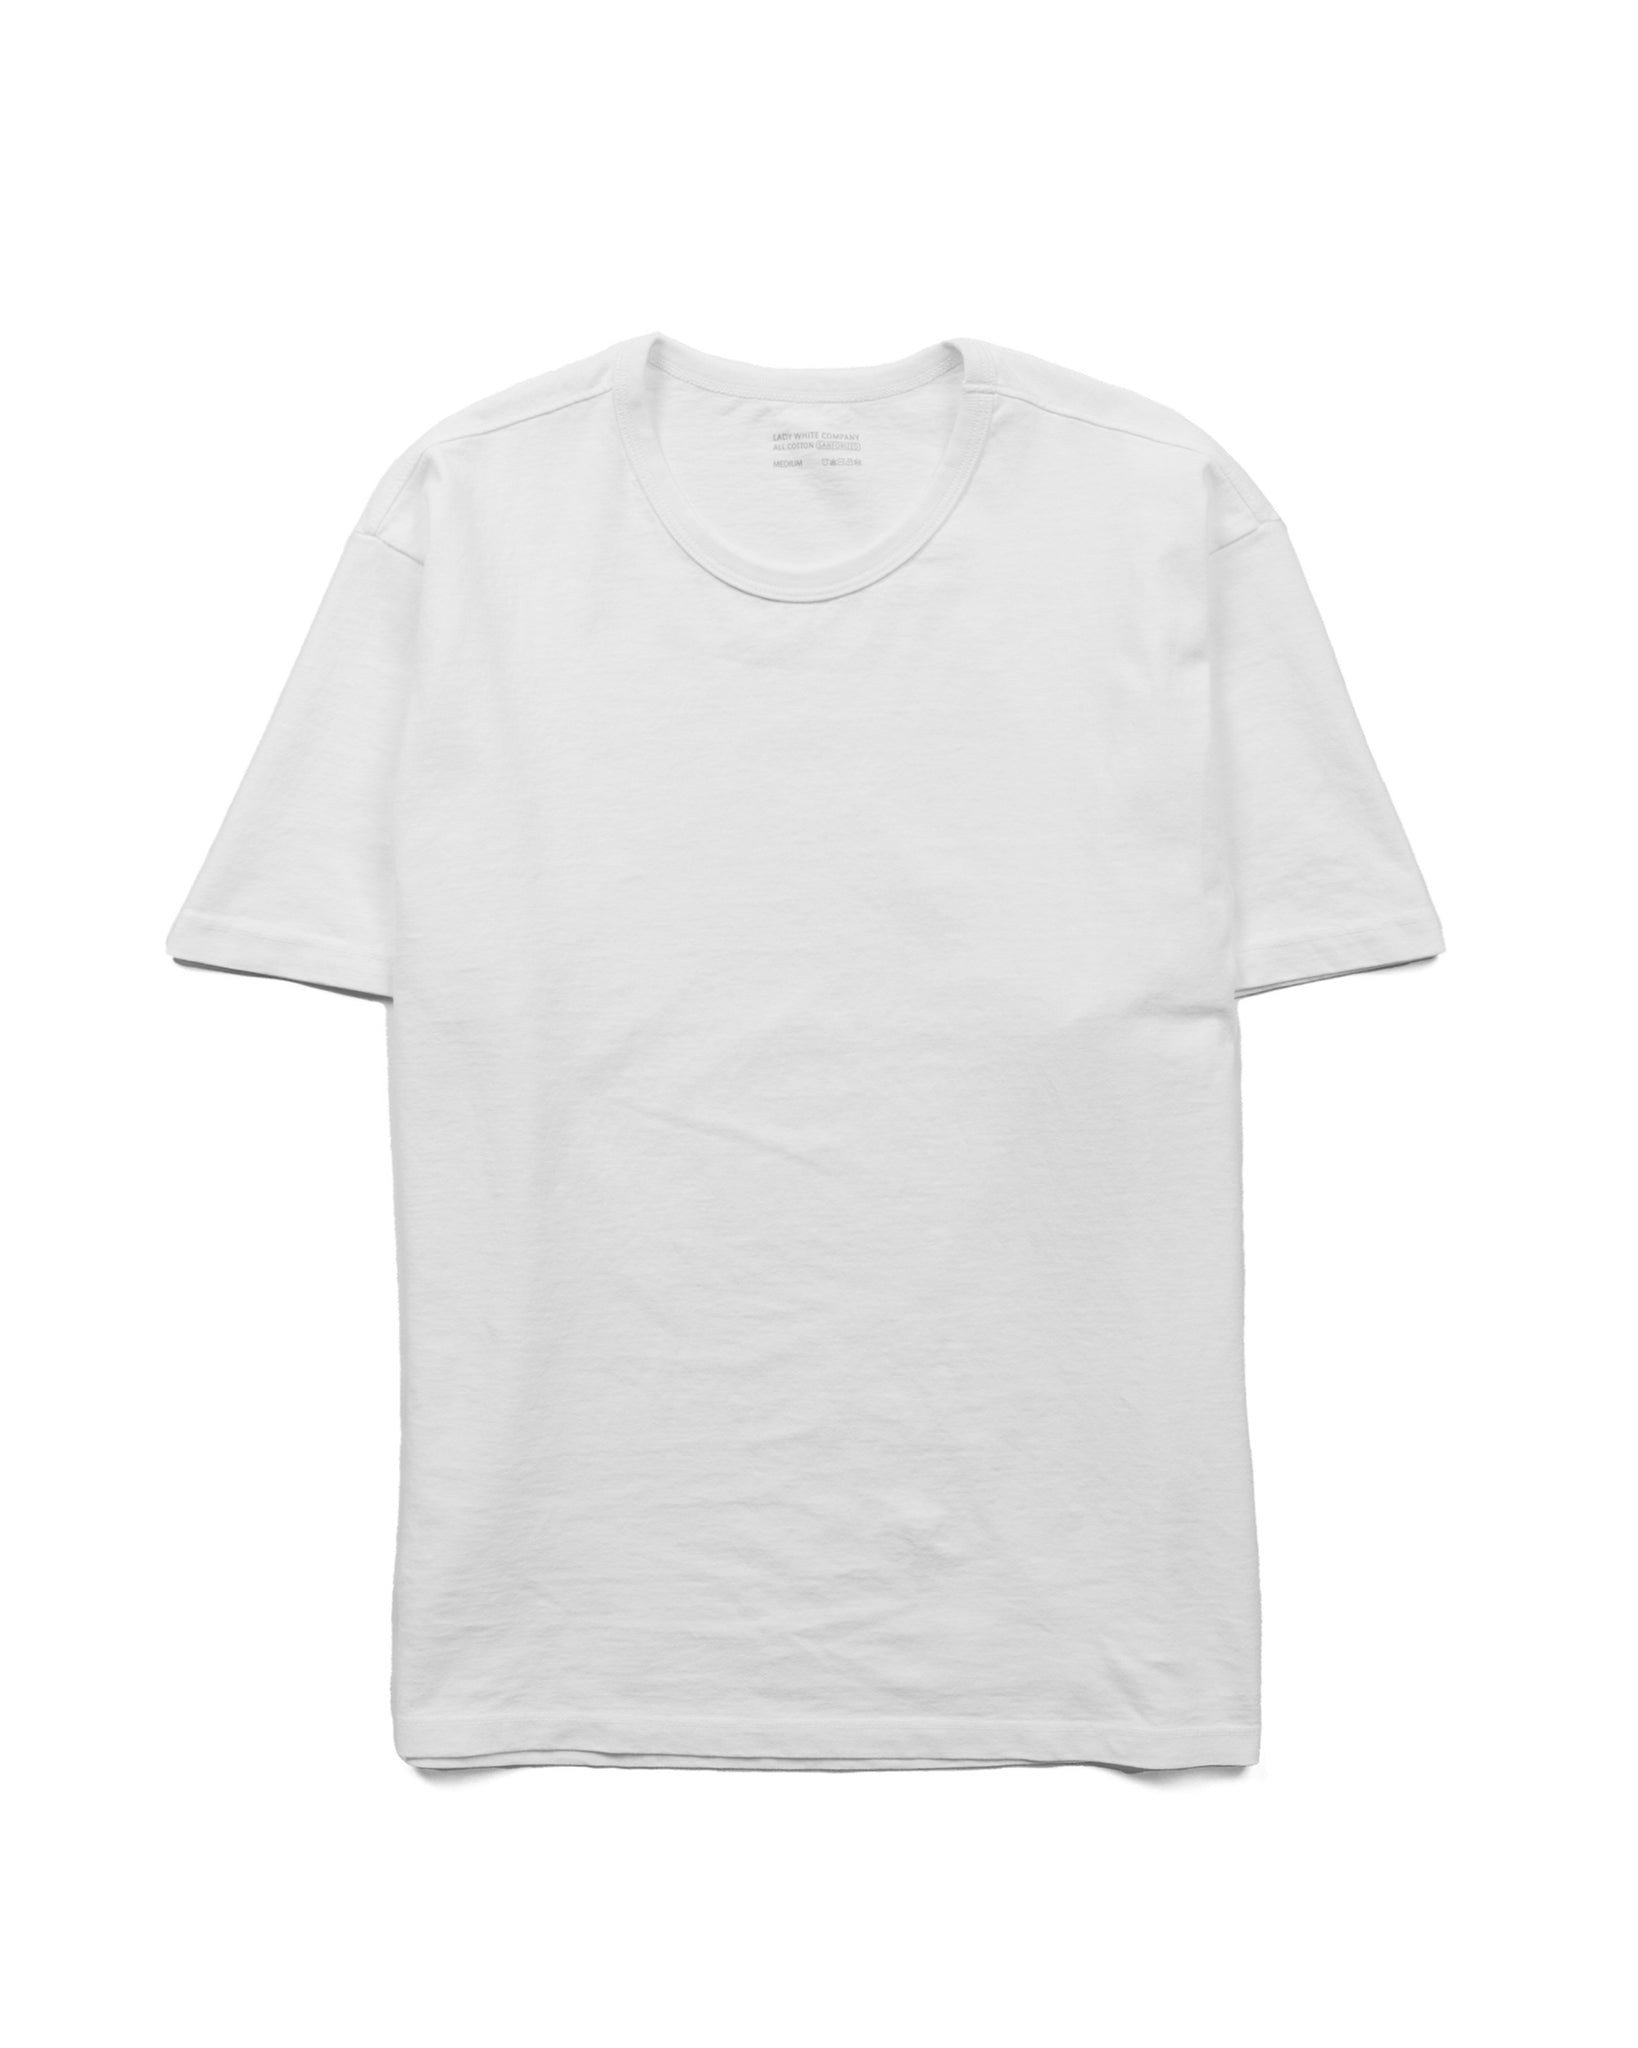 Lady White Co. T-Shirt 2-Pack White